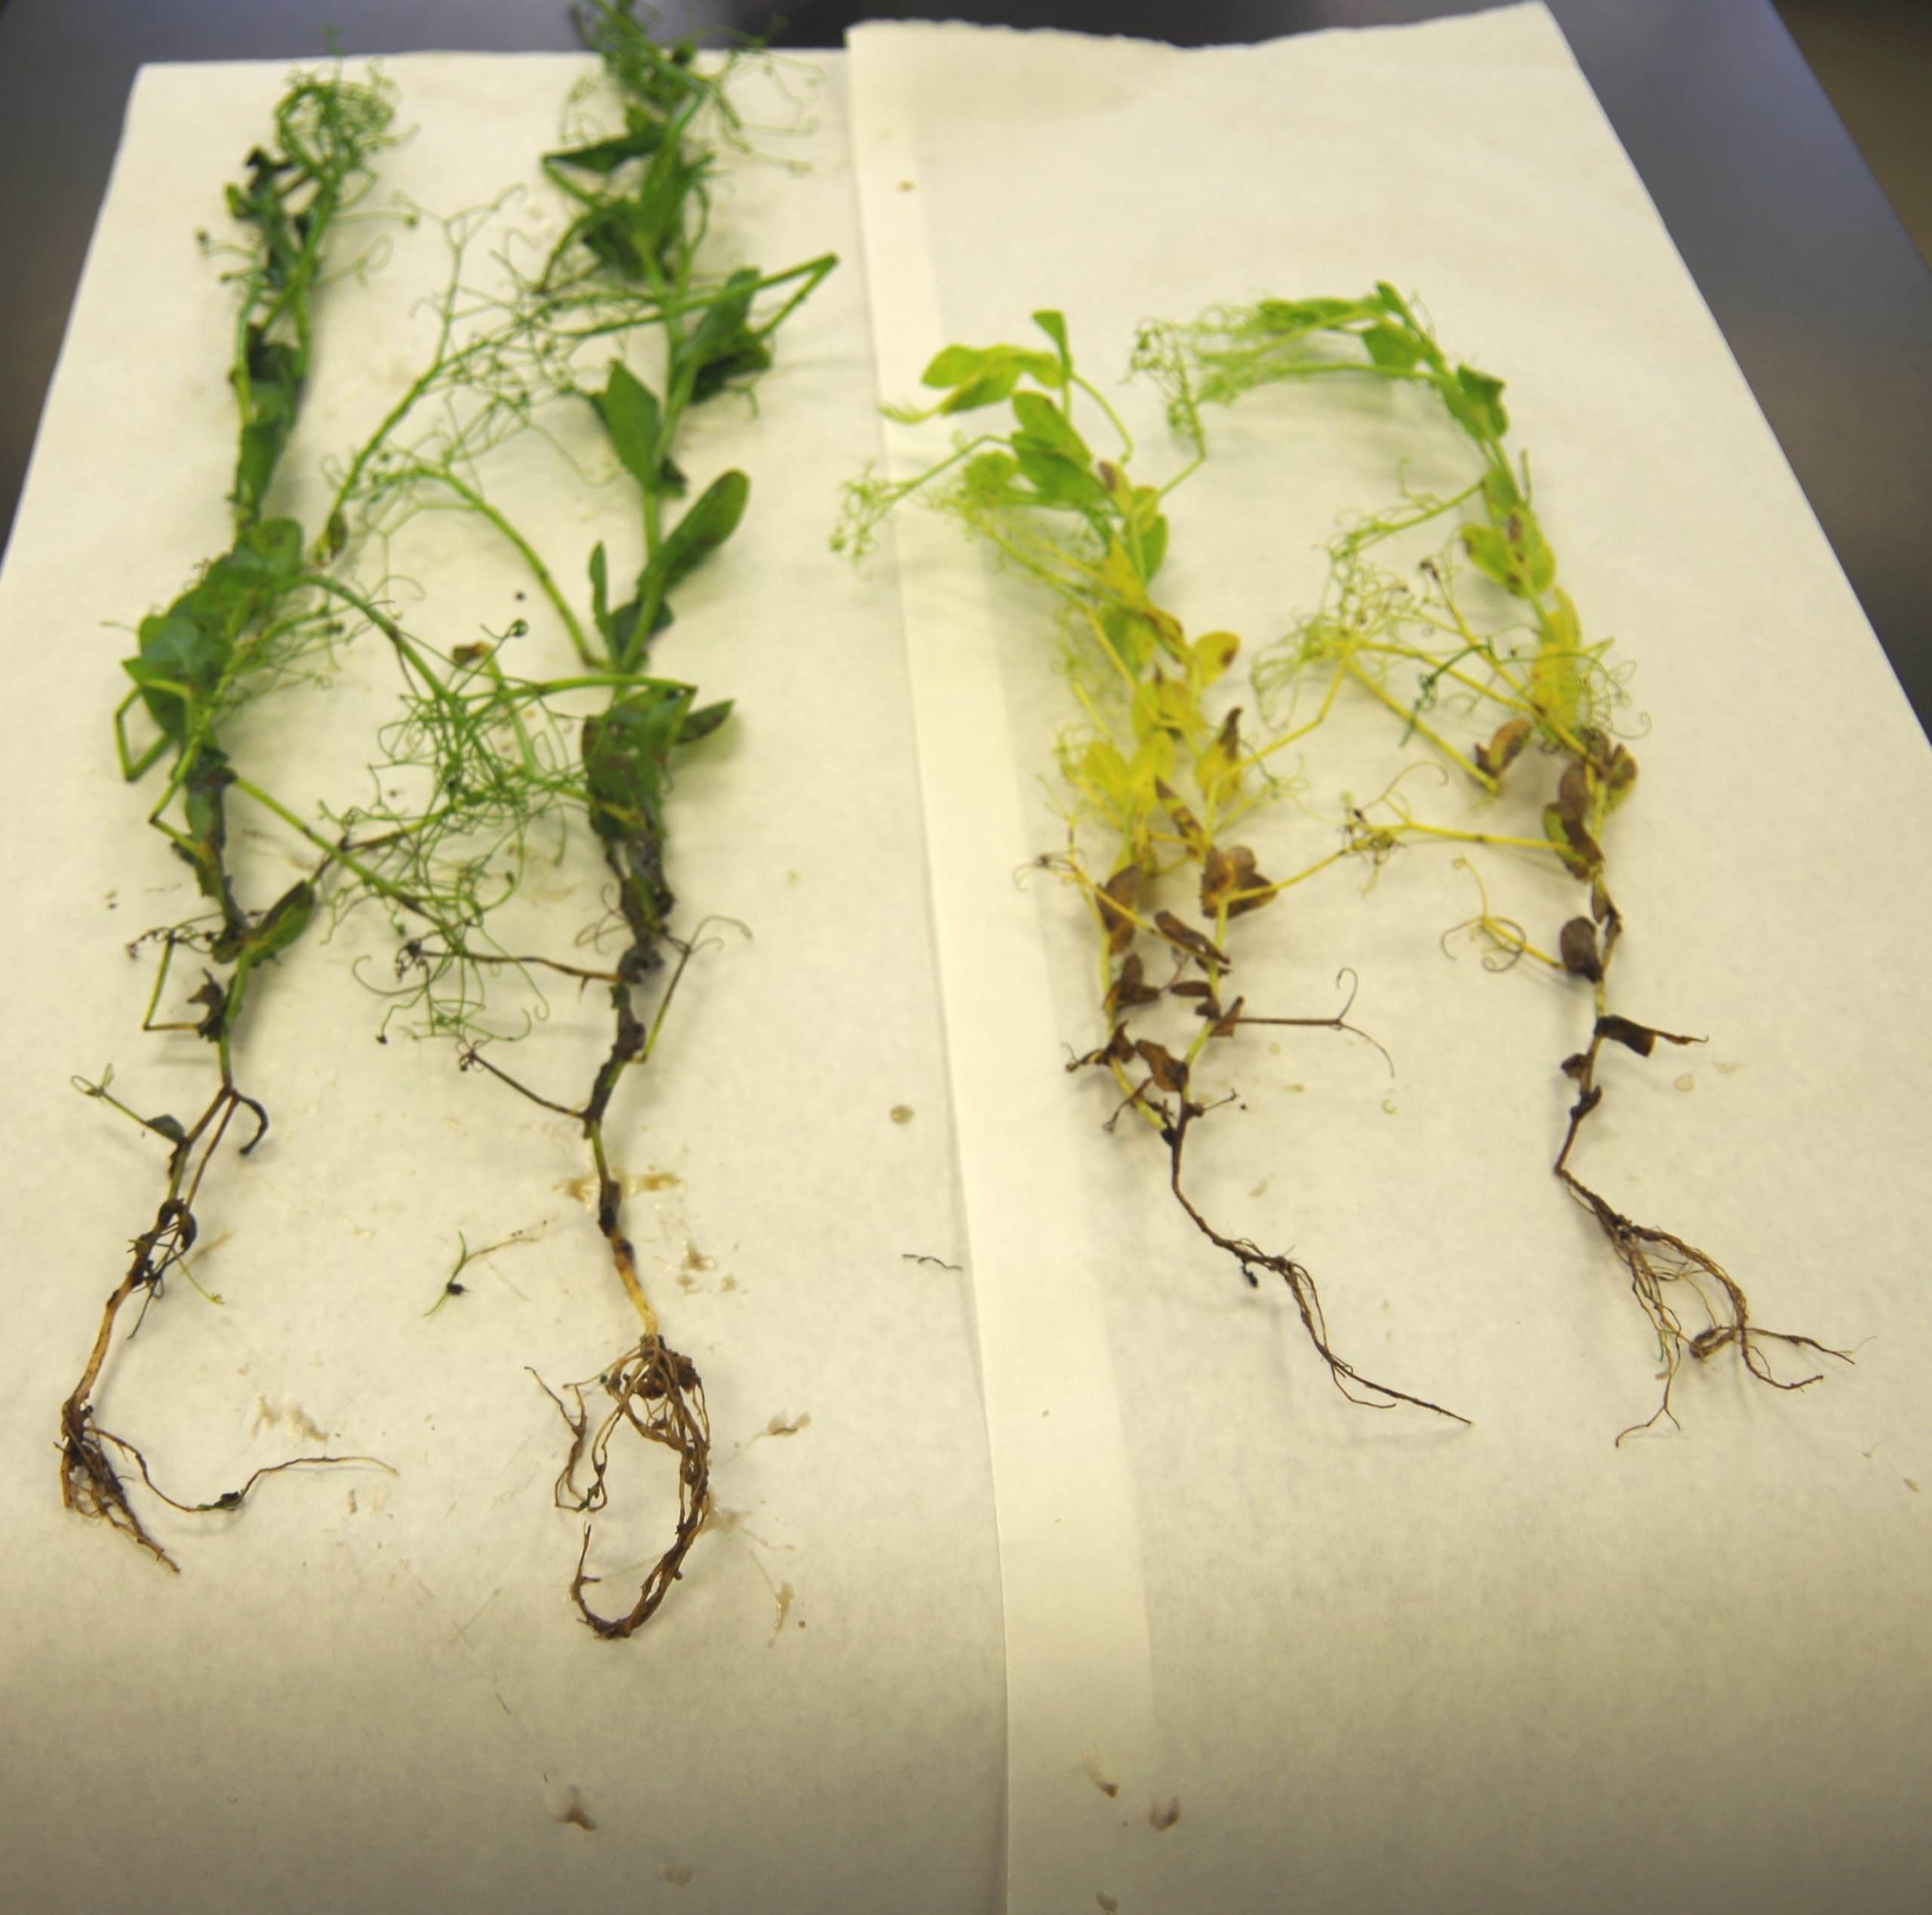 Healthy roots vs. Aphanomyces roots